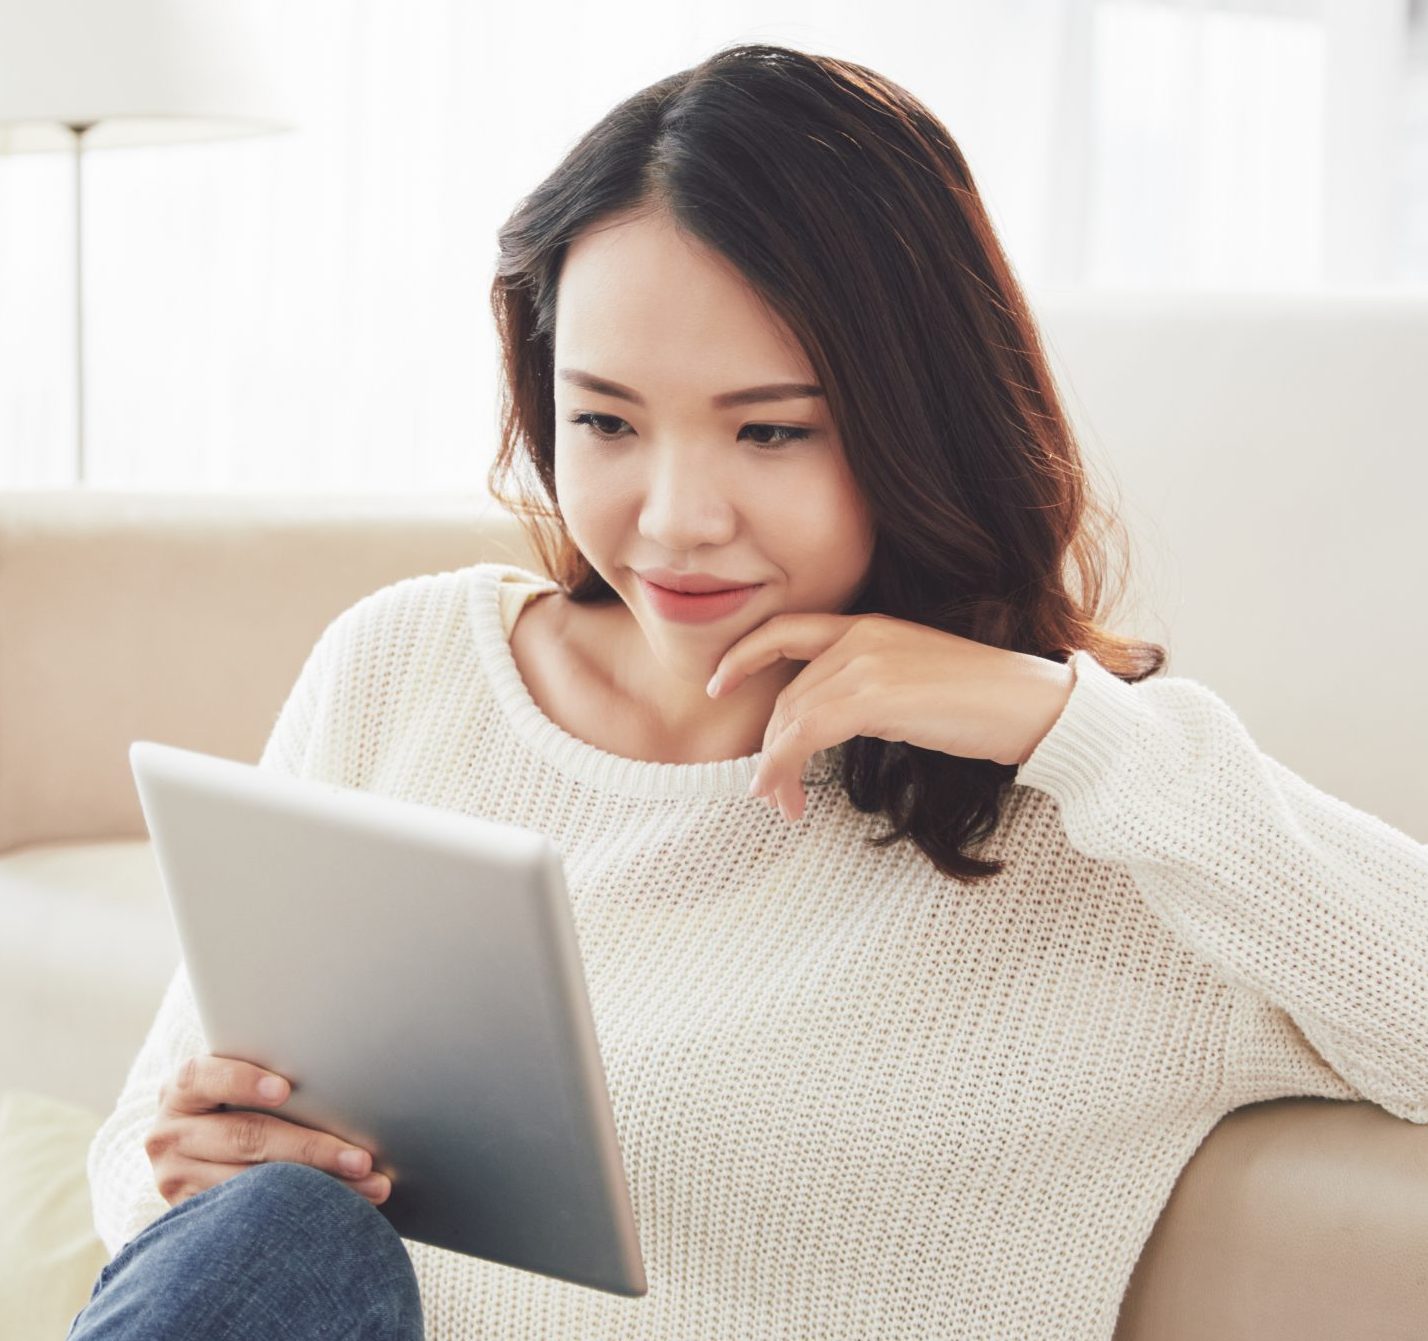 young woman smiling reading interesting web page content on tablet computer